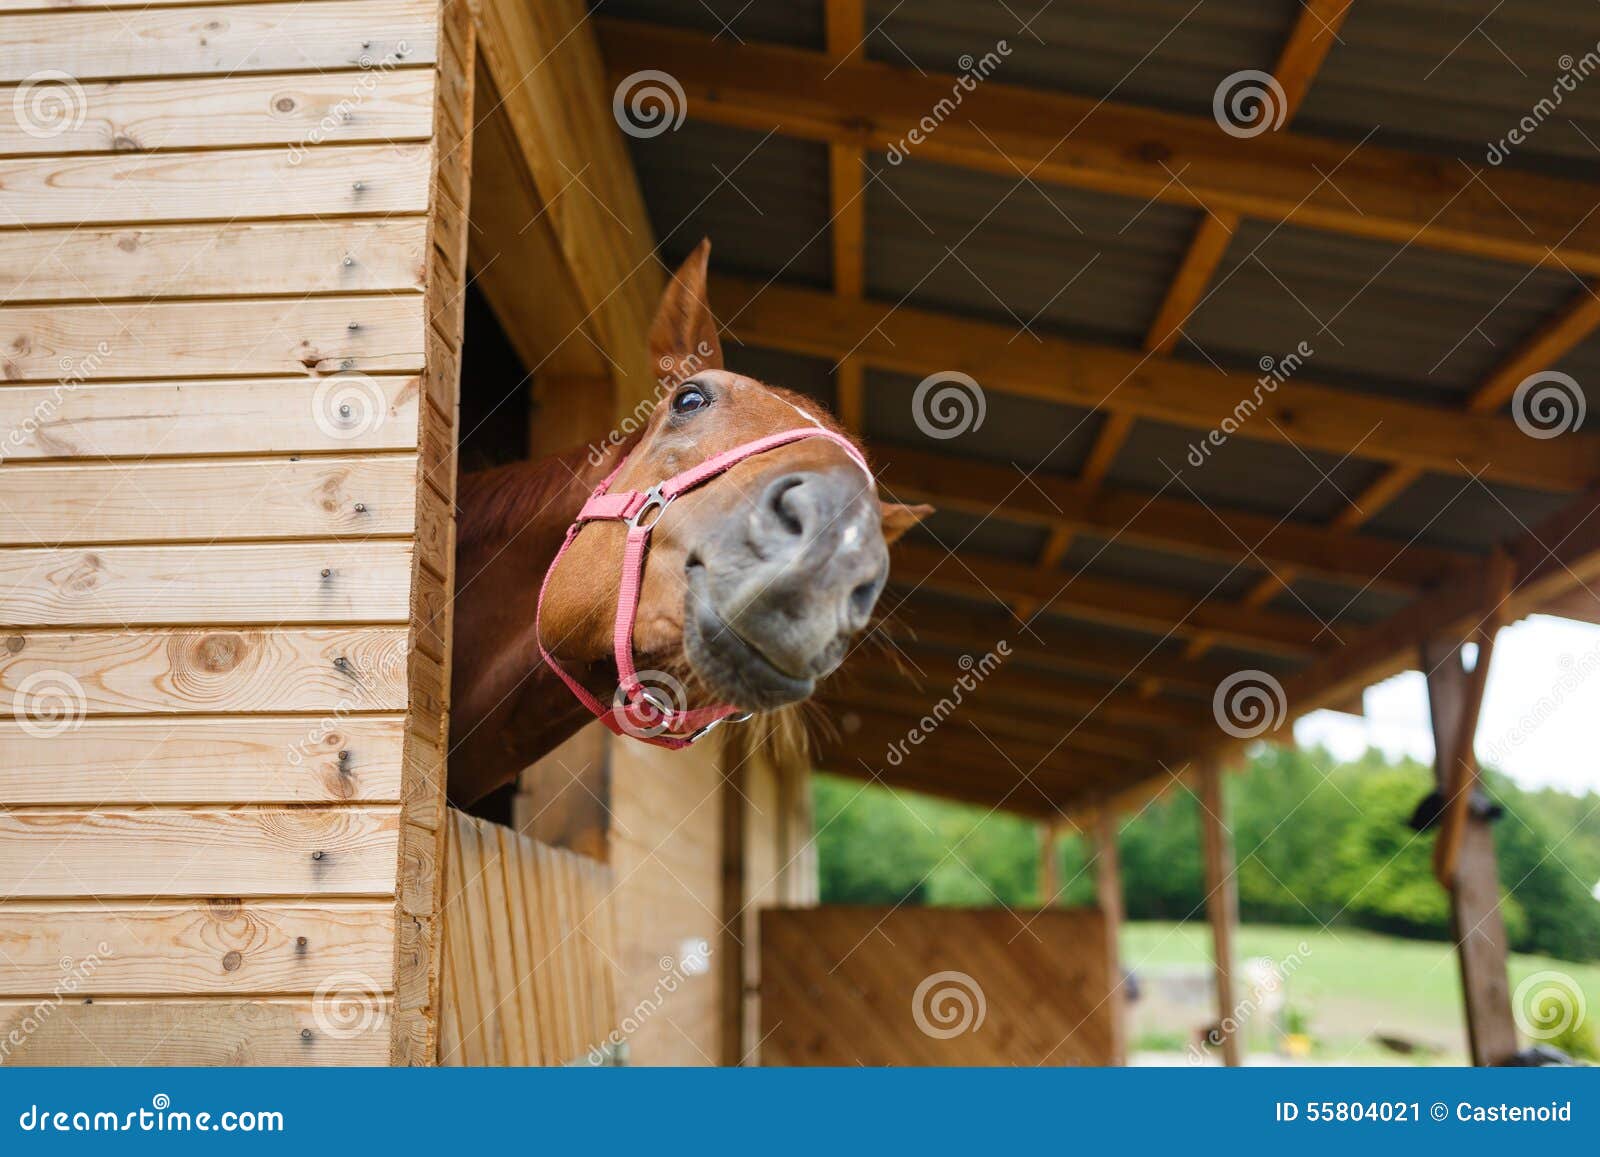 horse in the stable